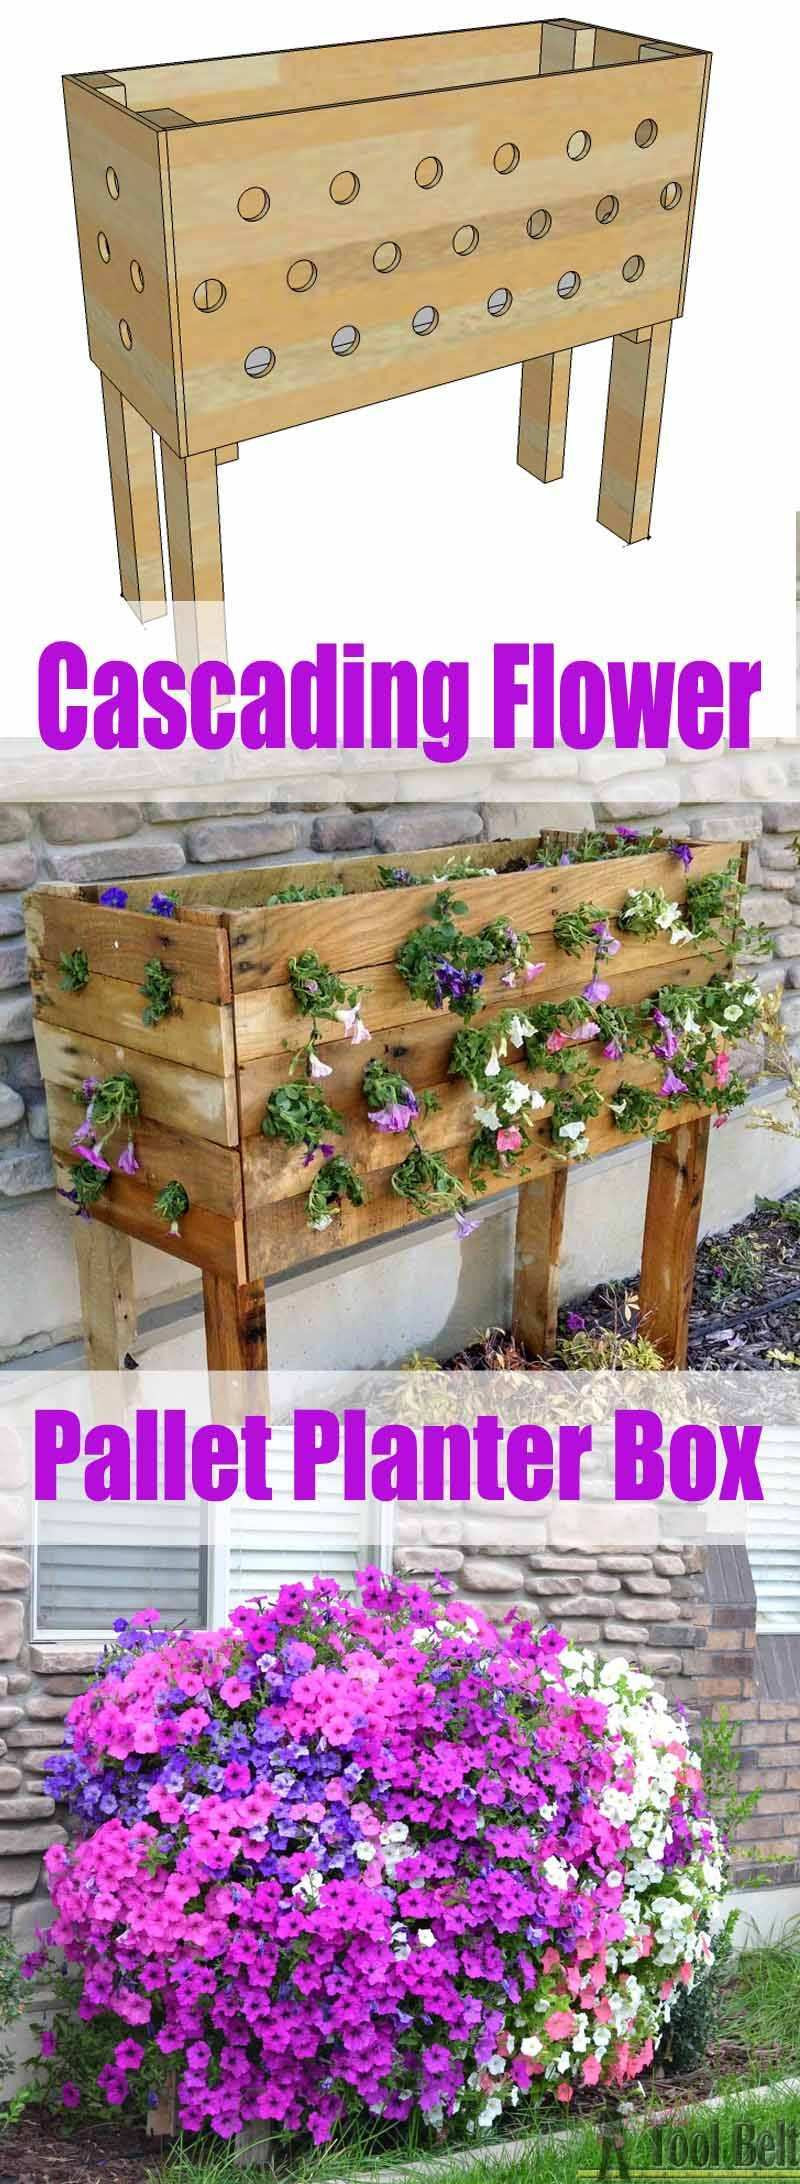 23 Lovely Vw Bug Flower Vase 2024 free download vw bug flower vase of build a planter box for vegetables luxury wooden wedding flowers h within build a planter box for vegetables lovely 20 awesome diy backyard projects hative of build a